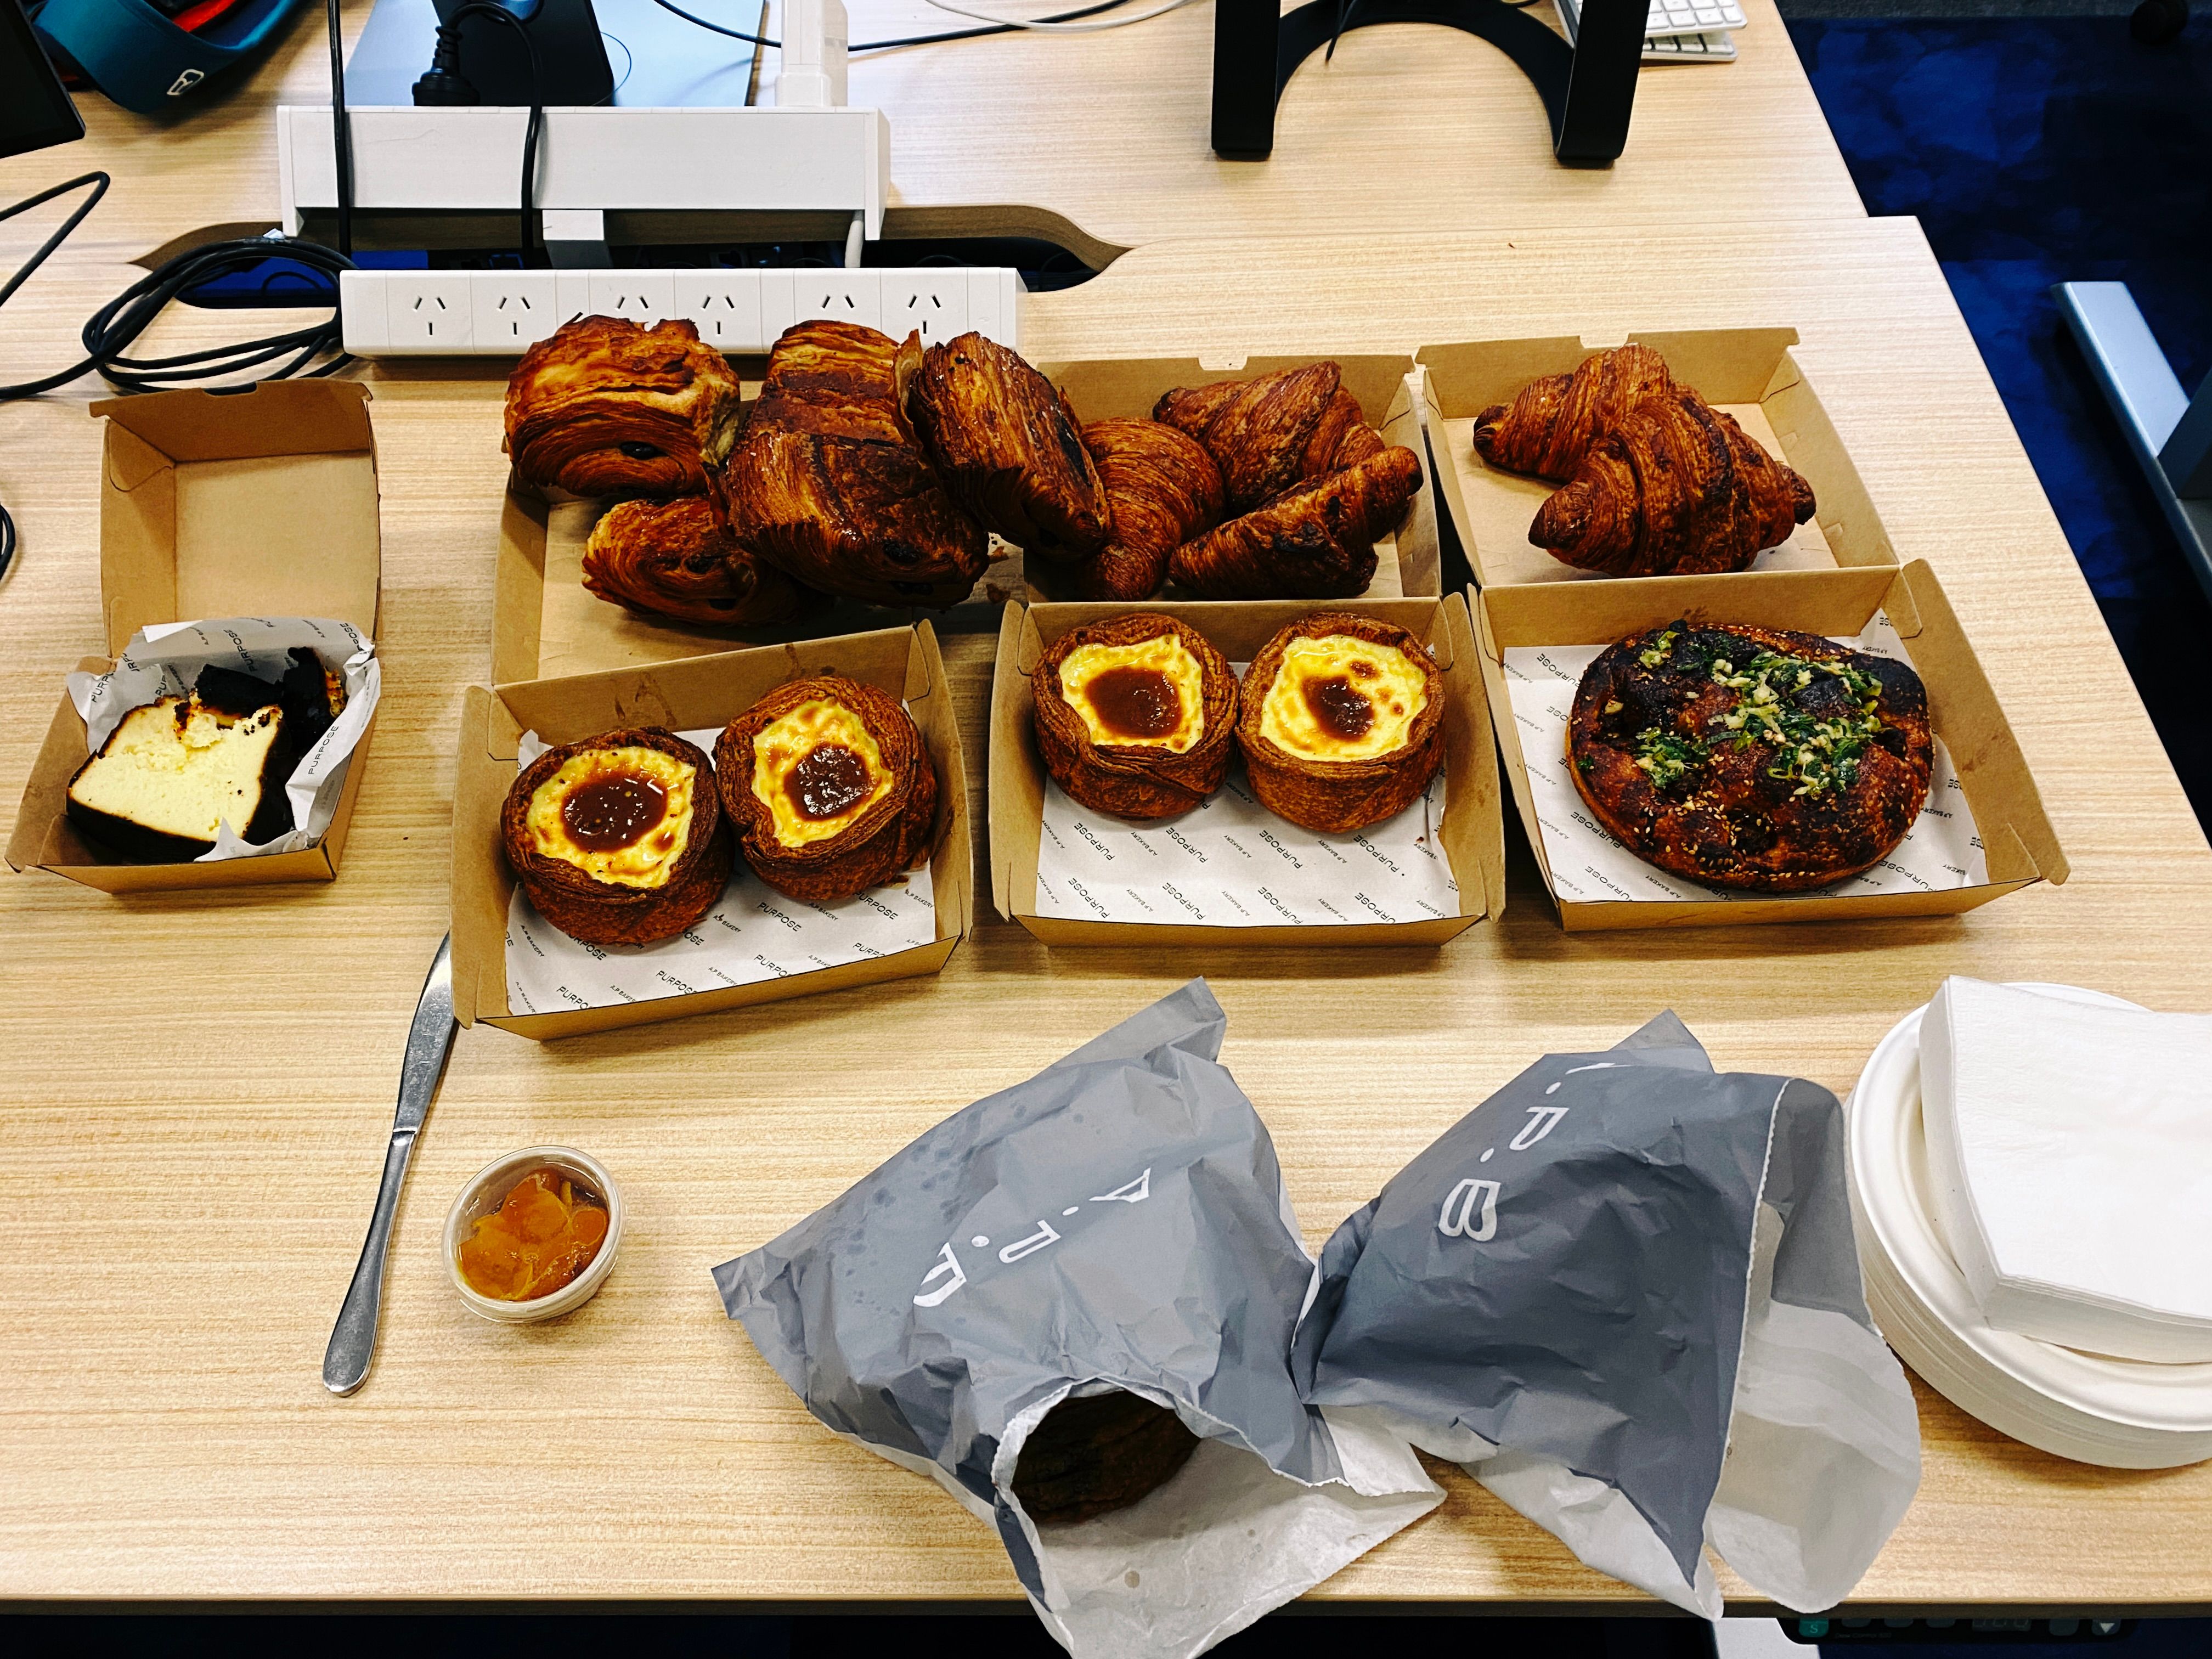 A photo of a bunch of pastries and sweets (croissants, big cookies, etc.) sitting on an office desk.